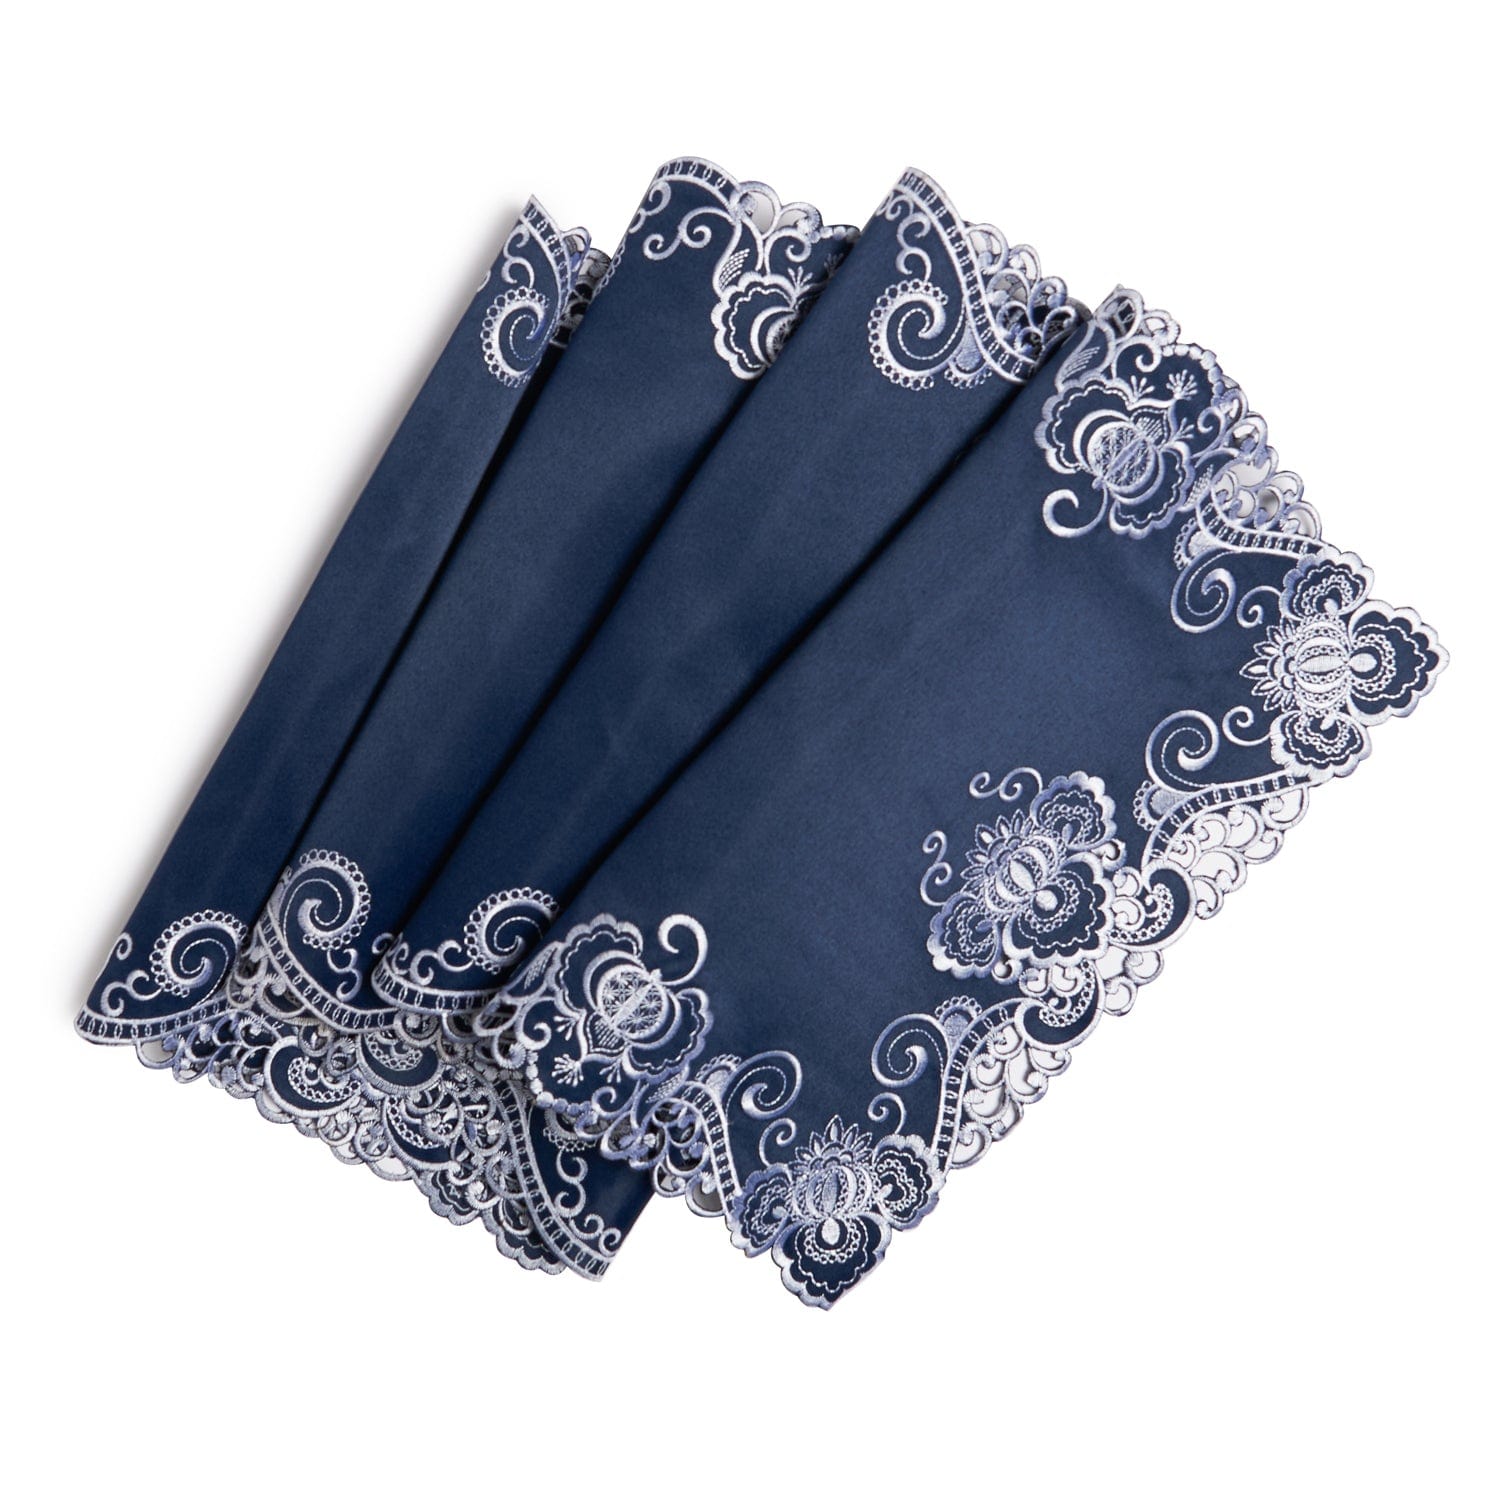 Paramount Midnight Blue Satin With White Embroidery Table Runner